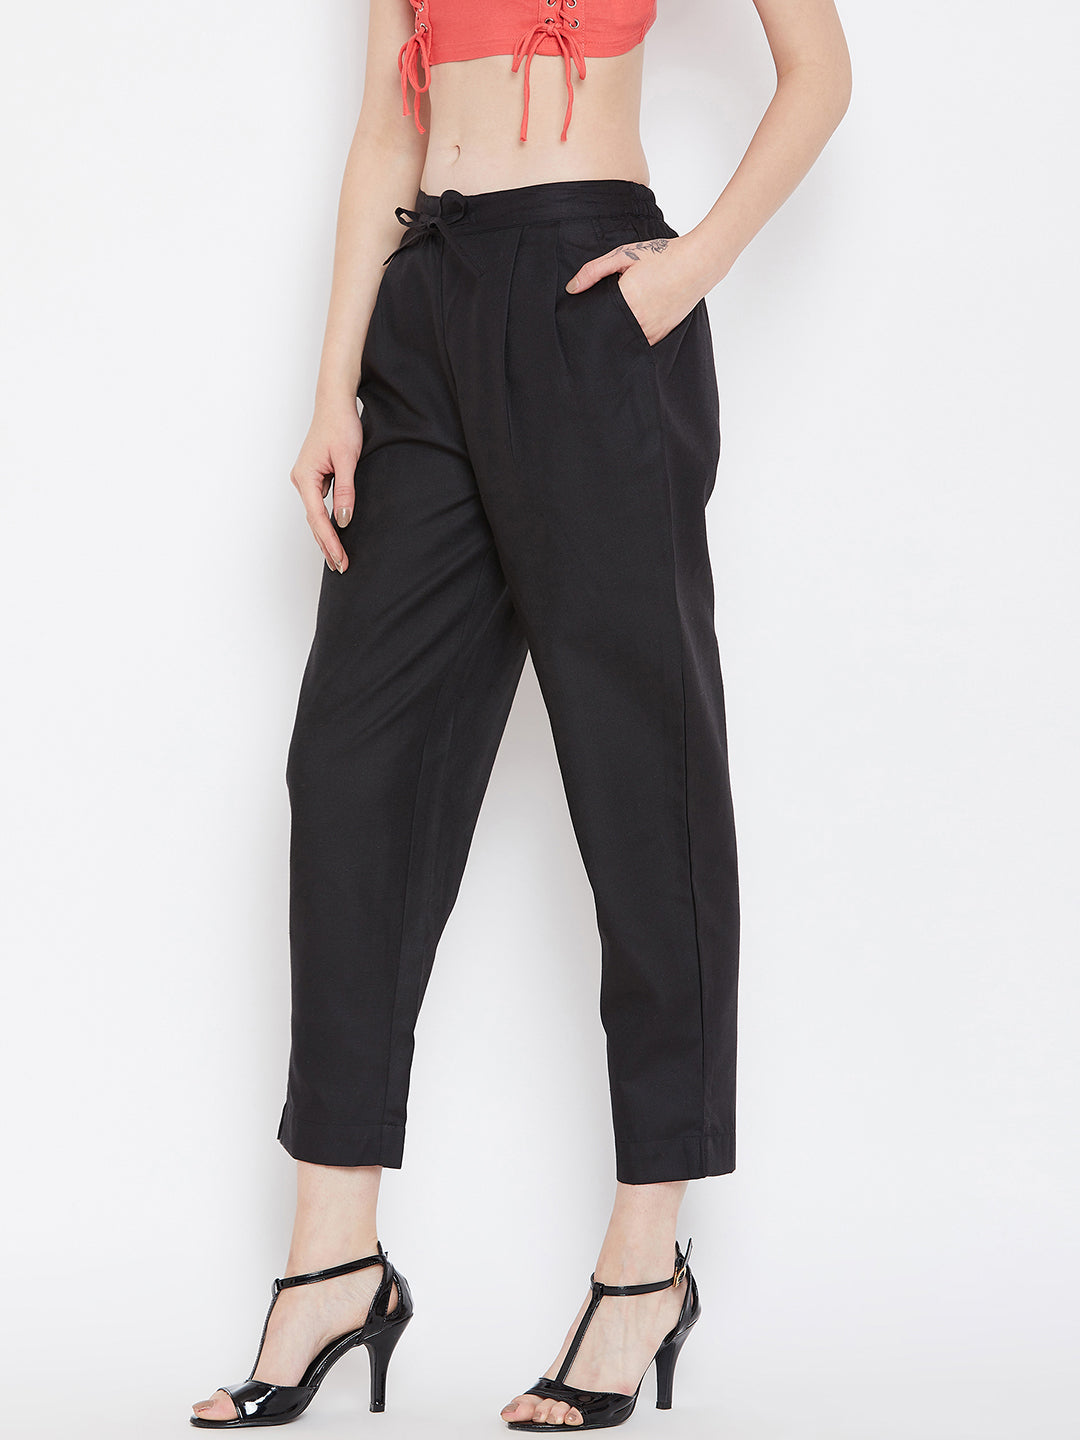 Relaxed Fit Trouser.